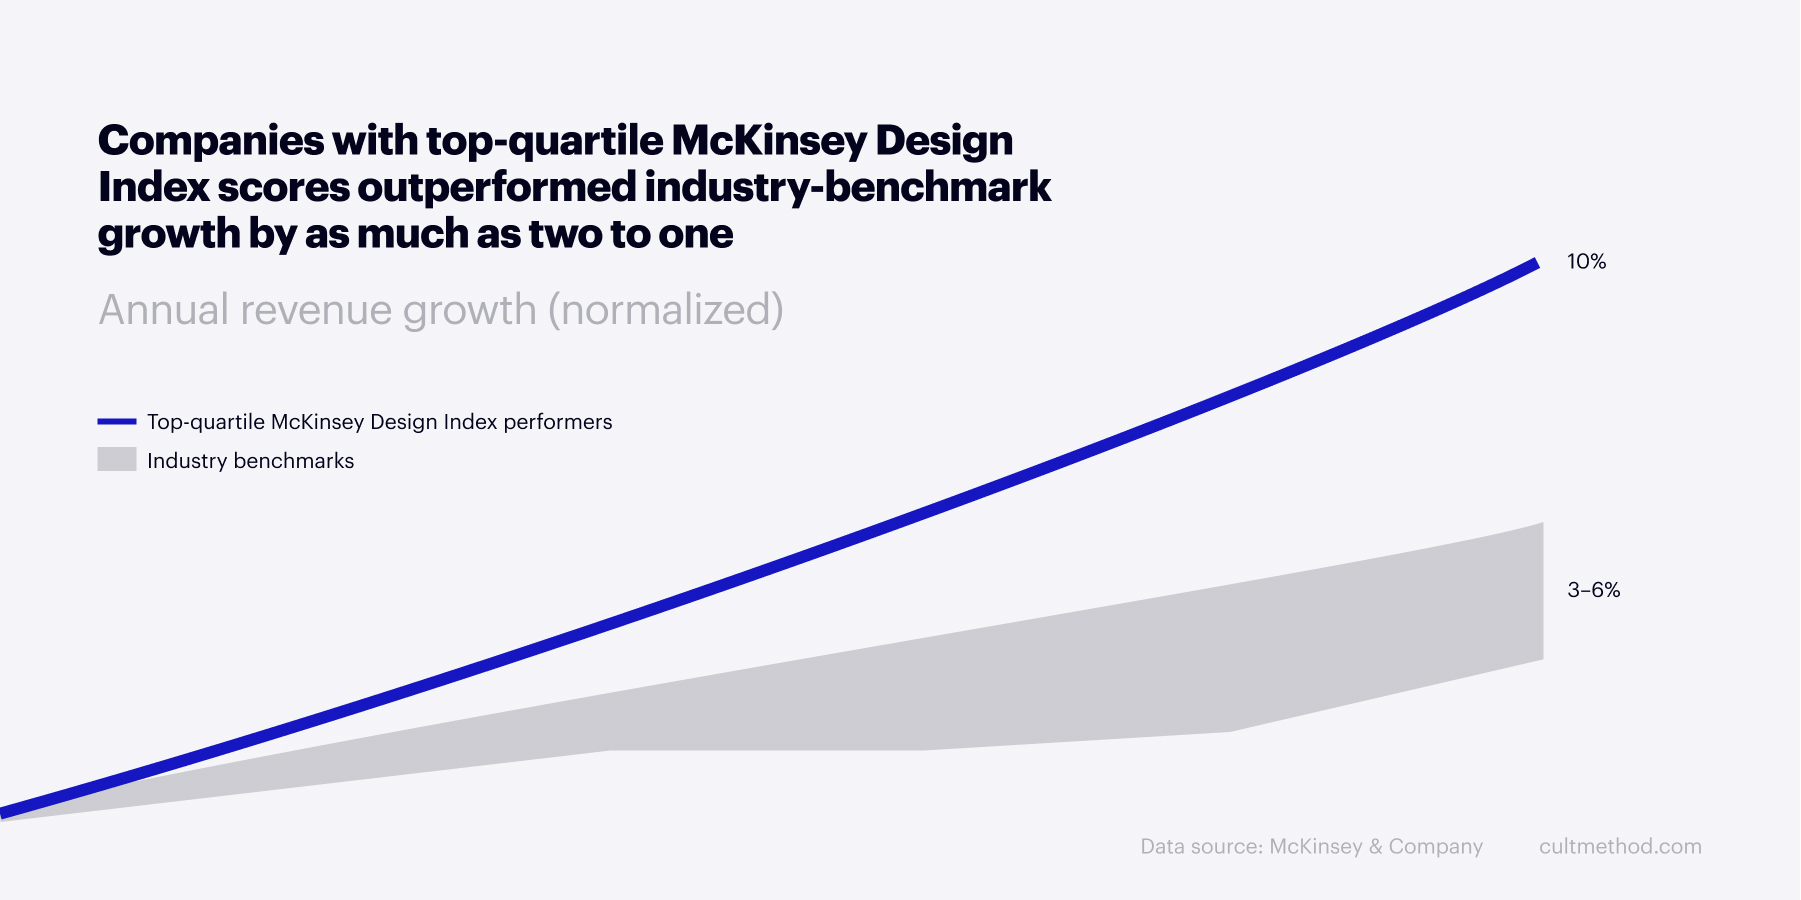 Source: McKinsey & Company, [The business value of design](https://www.mckinsey.com/business-functions/mckinsey-design/our-insights/the-business-value-of-design)